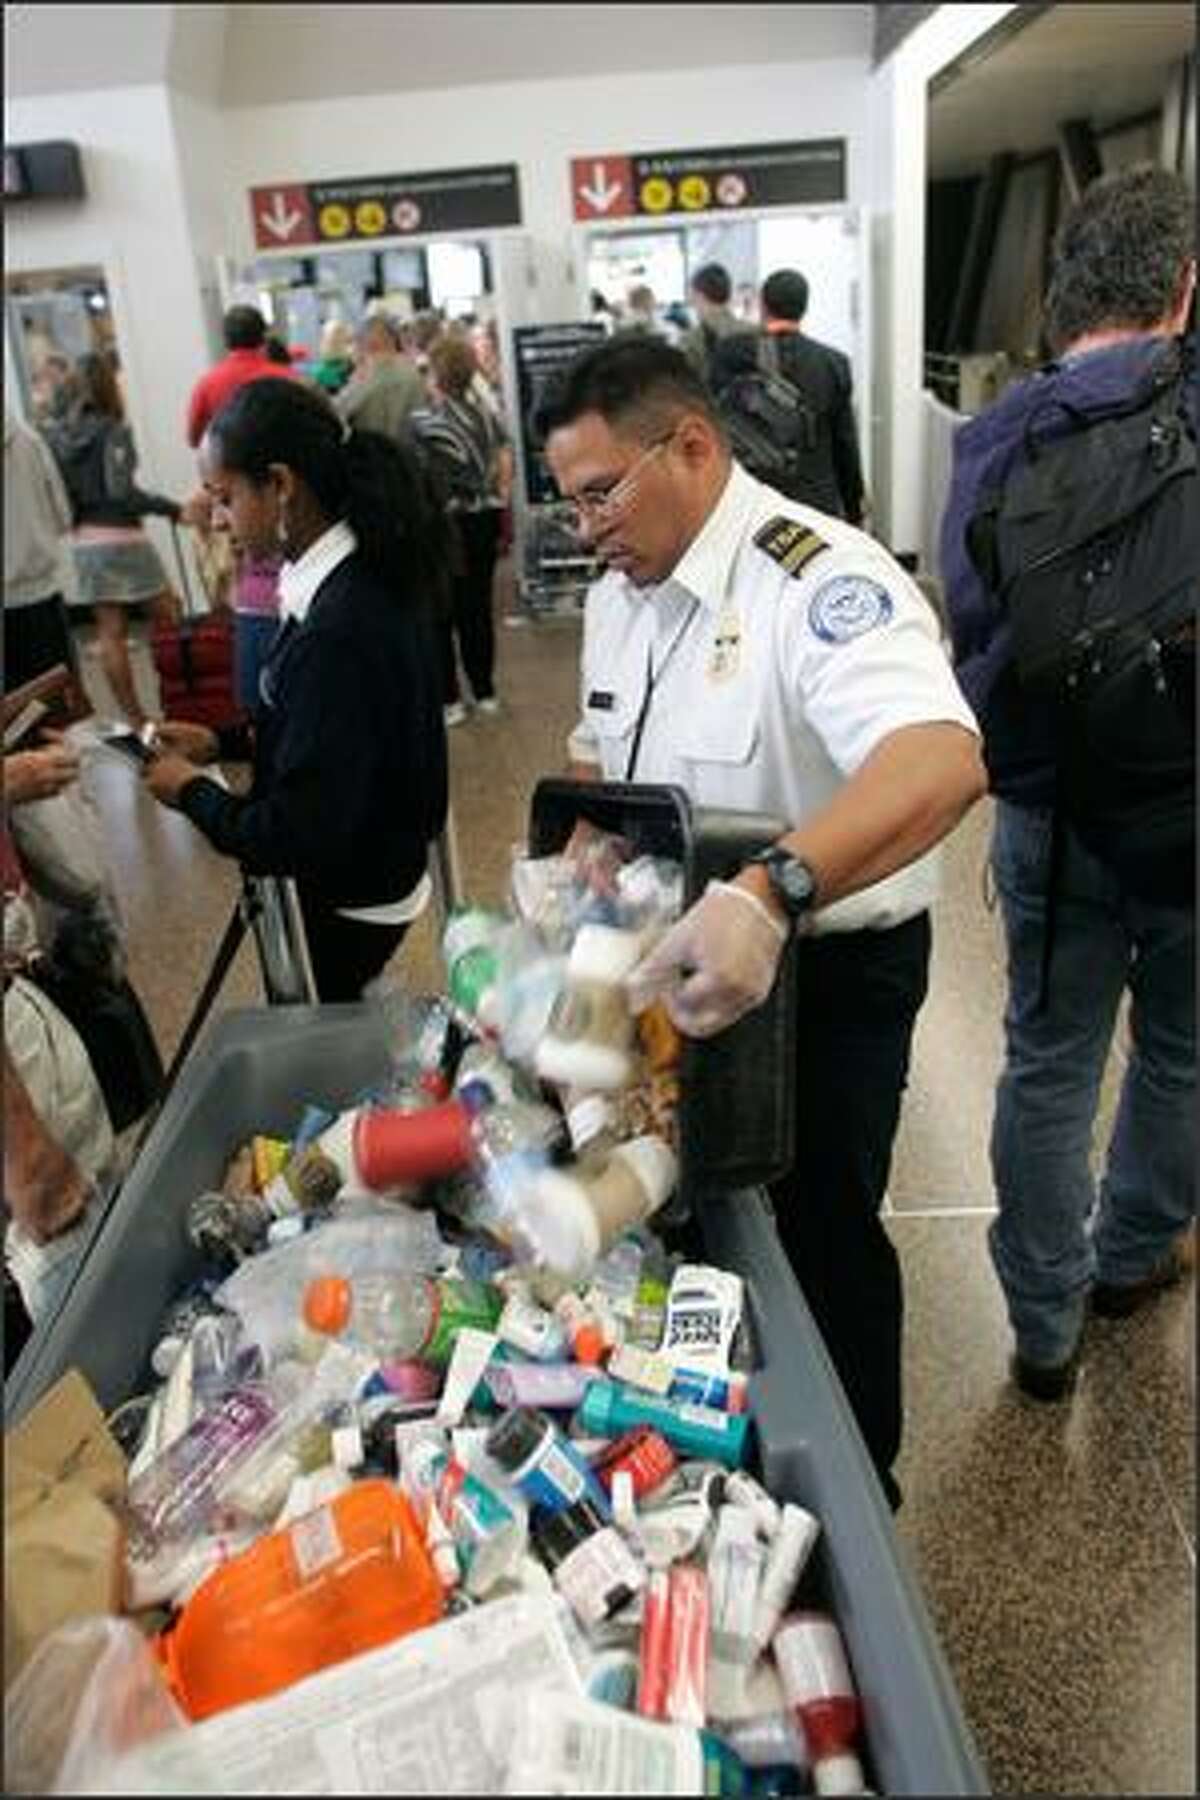 A Transportation Security Administration employee dumps a box containing items no longer permitted on board aircraft -- including beverages, toothpaste, shampoo, deodorant sticks and other such liquids and gels. New restrictions on carry-on luggage were imposed Thursday morning after British authorities thwarted a terrorist plot to blow up airliners headed for the United States using liquid explosives smuggled onto flights.